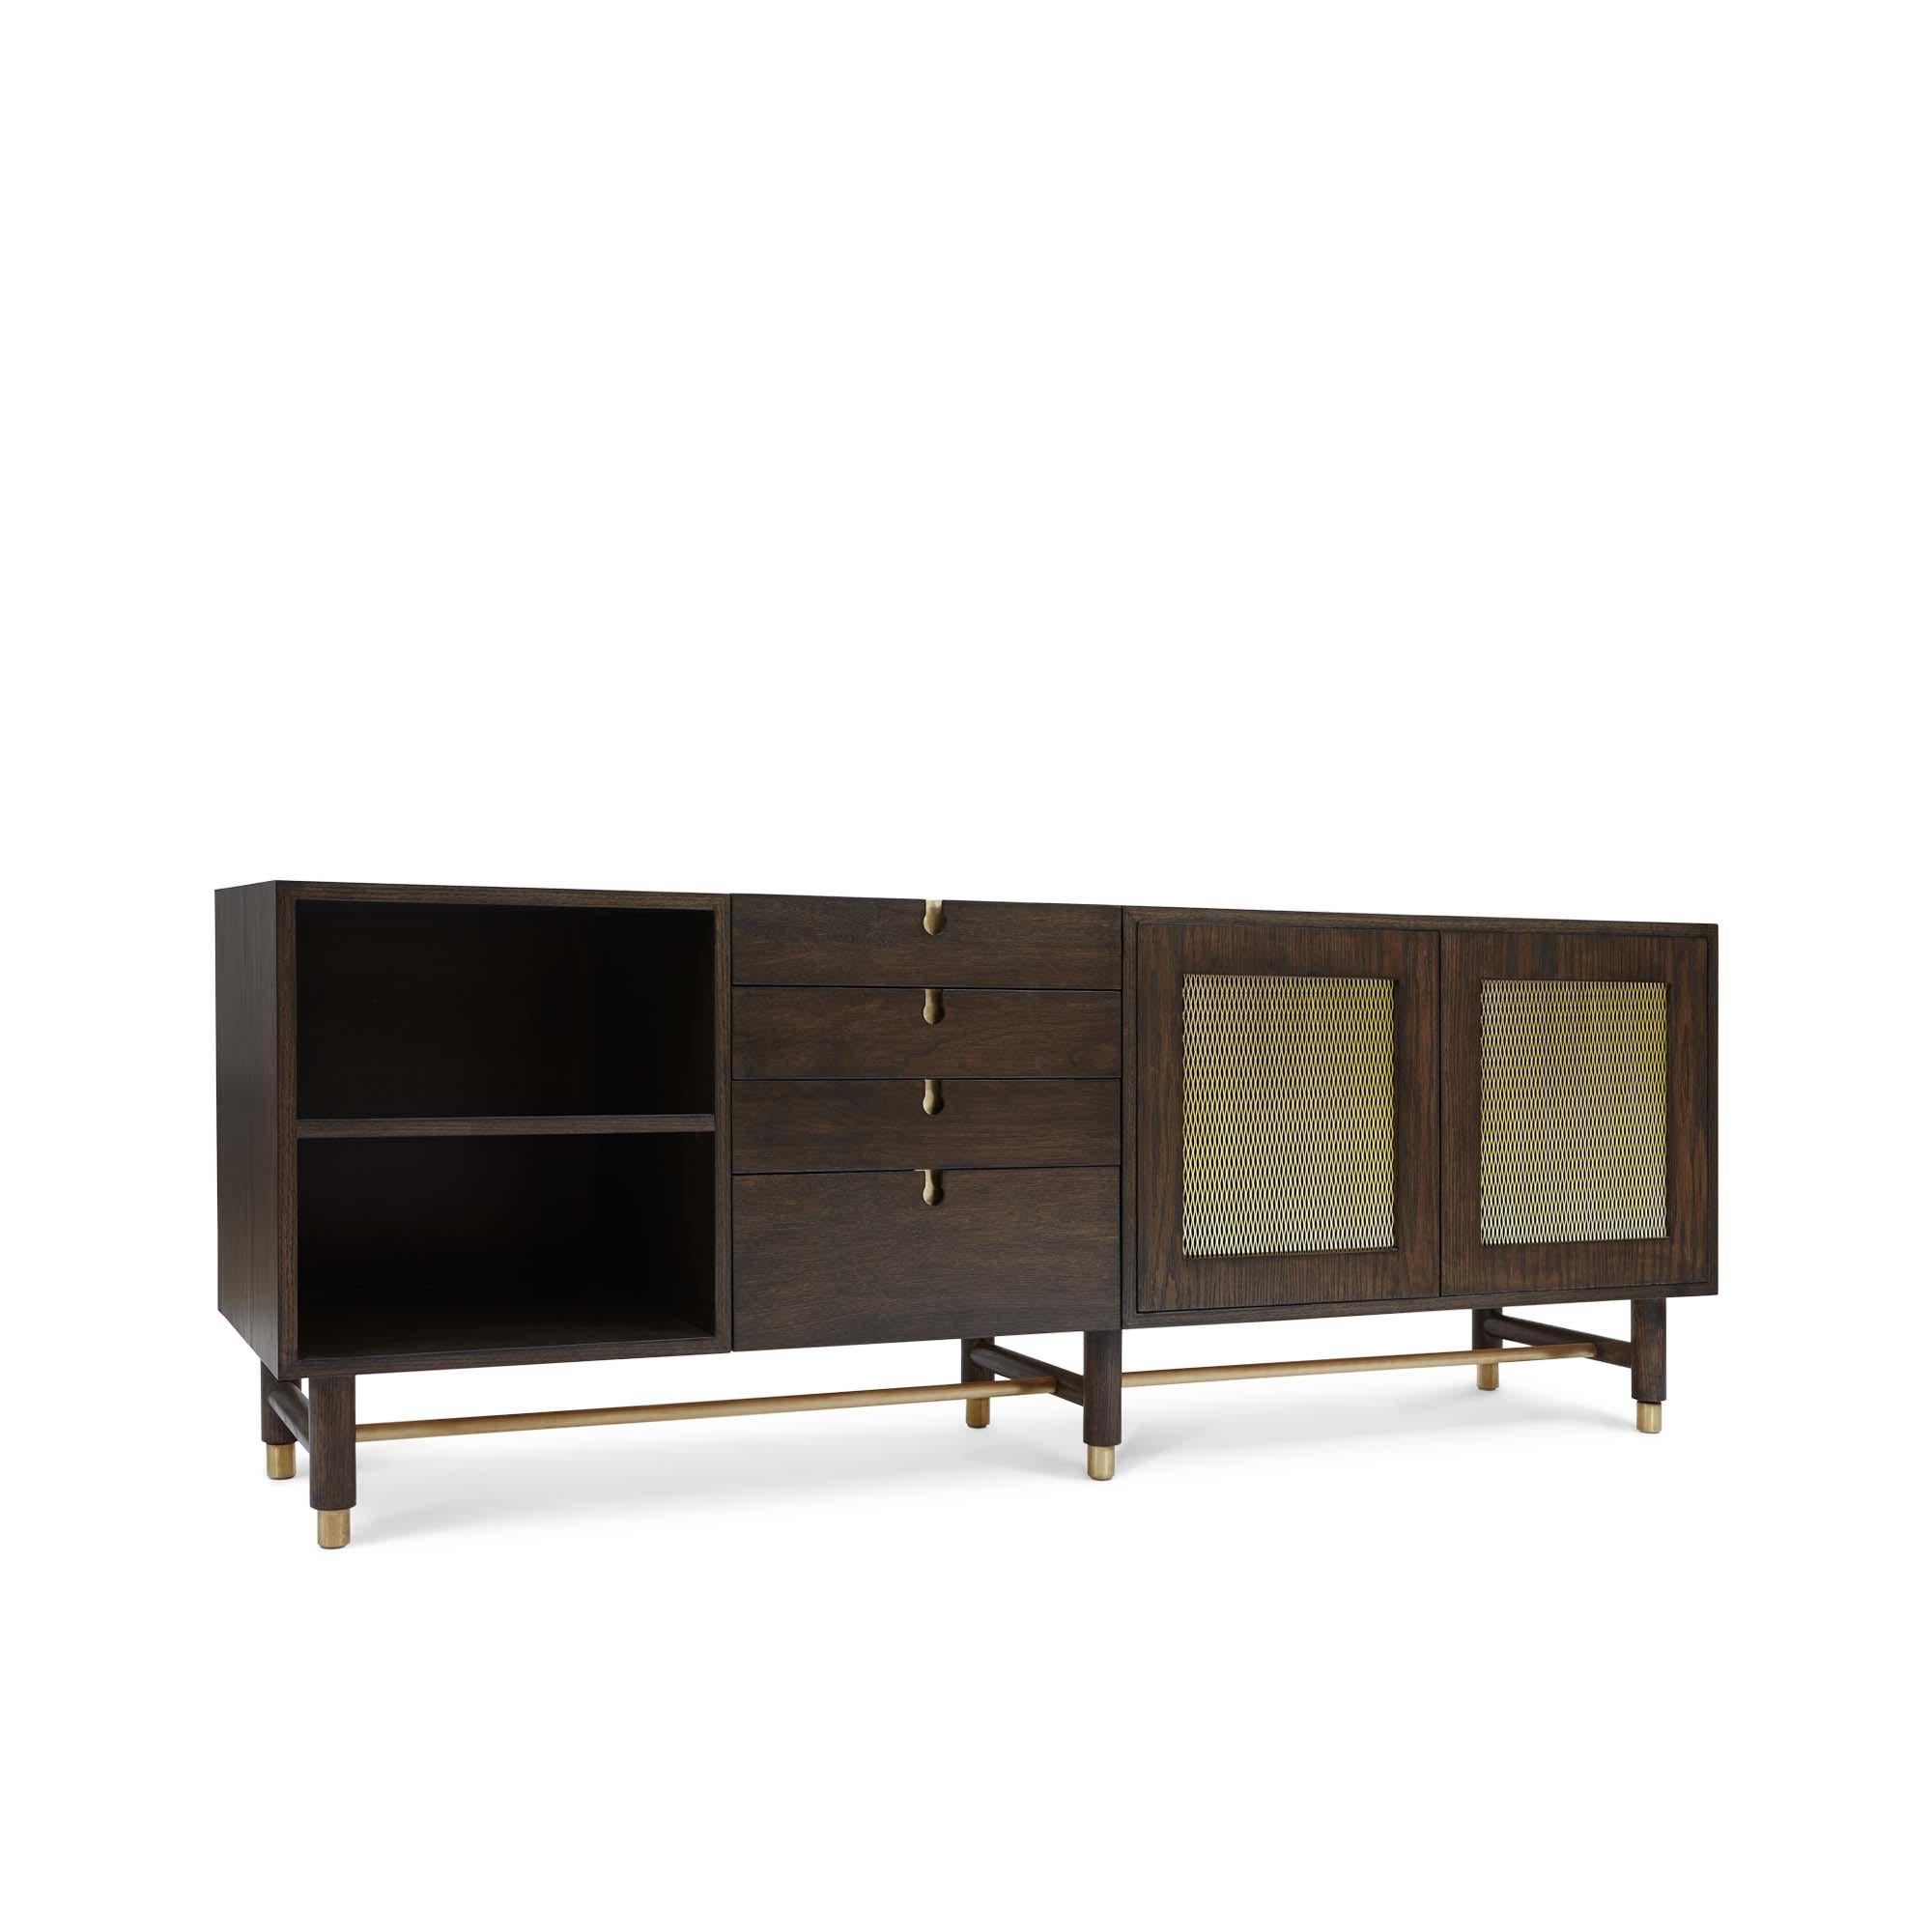 The Niguel Credenza features brass cap feet, a brass cross-stretcher bar and brass inlaid details with brass mesh sliding bypass doors. Shown here in dark grey washed oak and satin brass. 

The Lawson-Fenning Collection is designed and handmade in